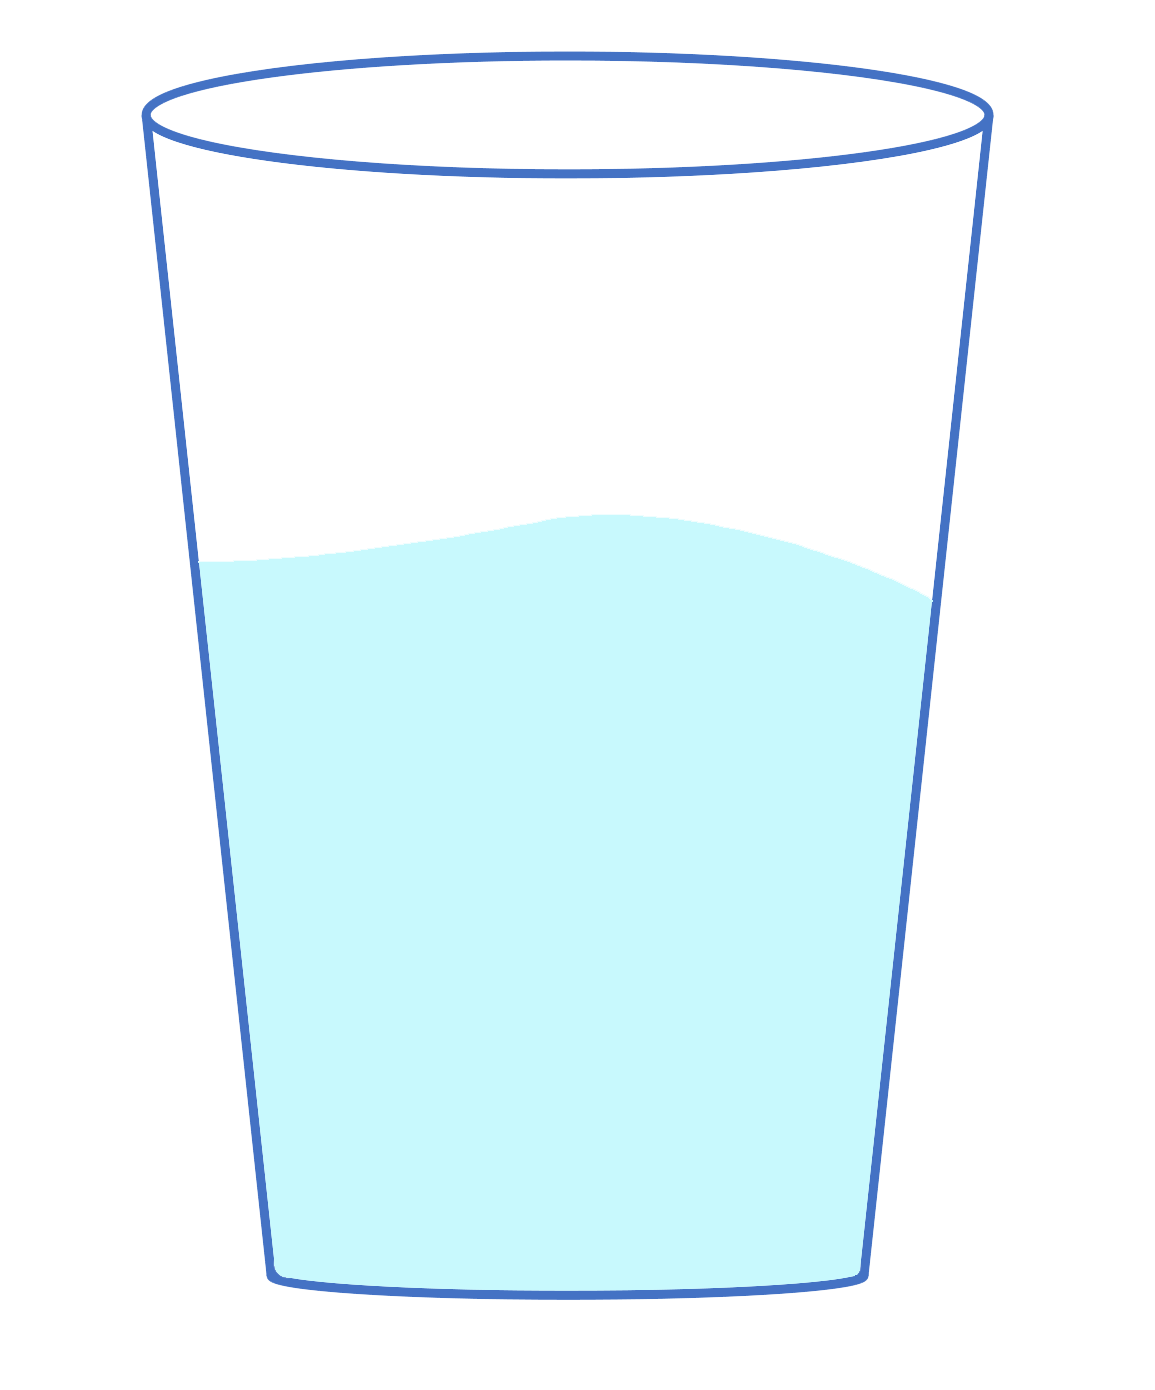 A clipart drawing of a cup with liquid in it.